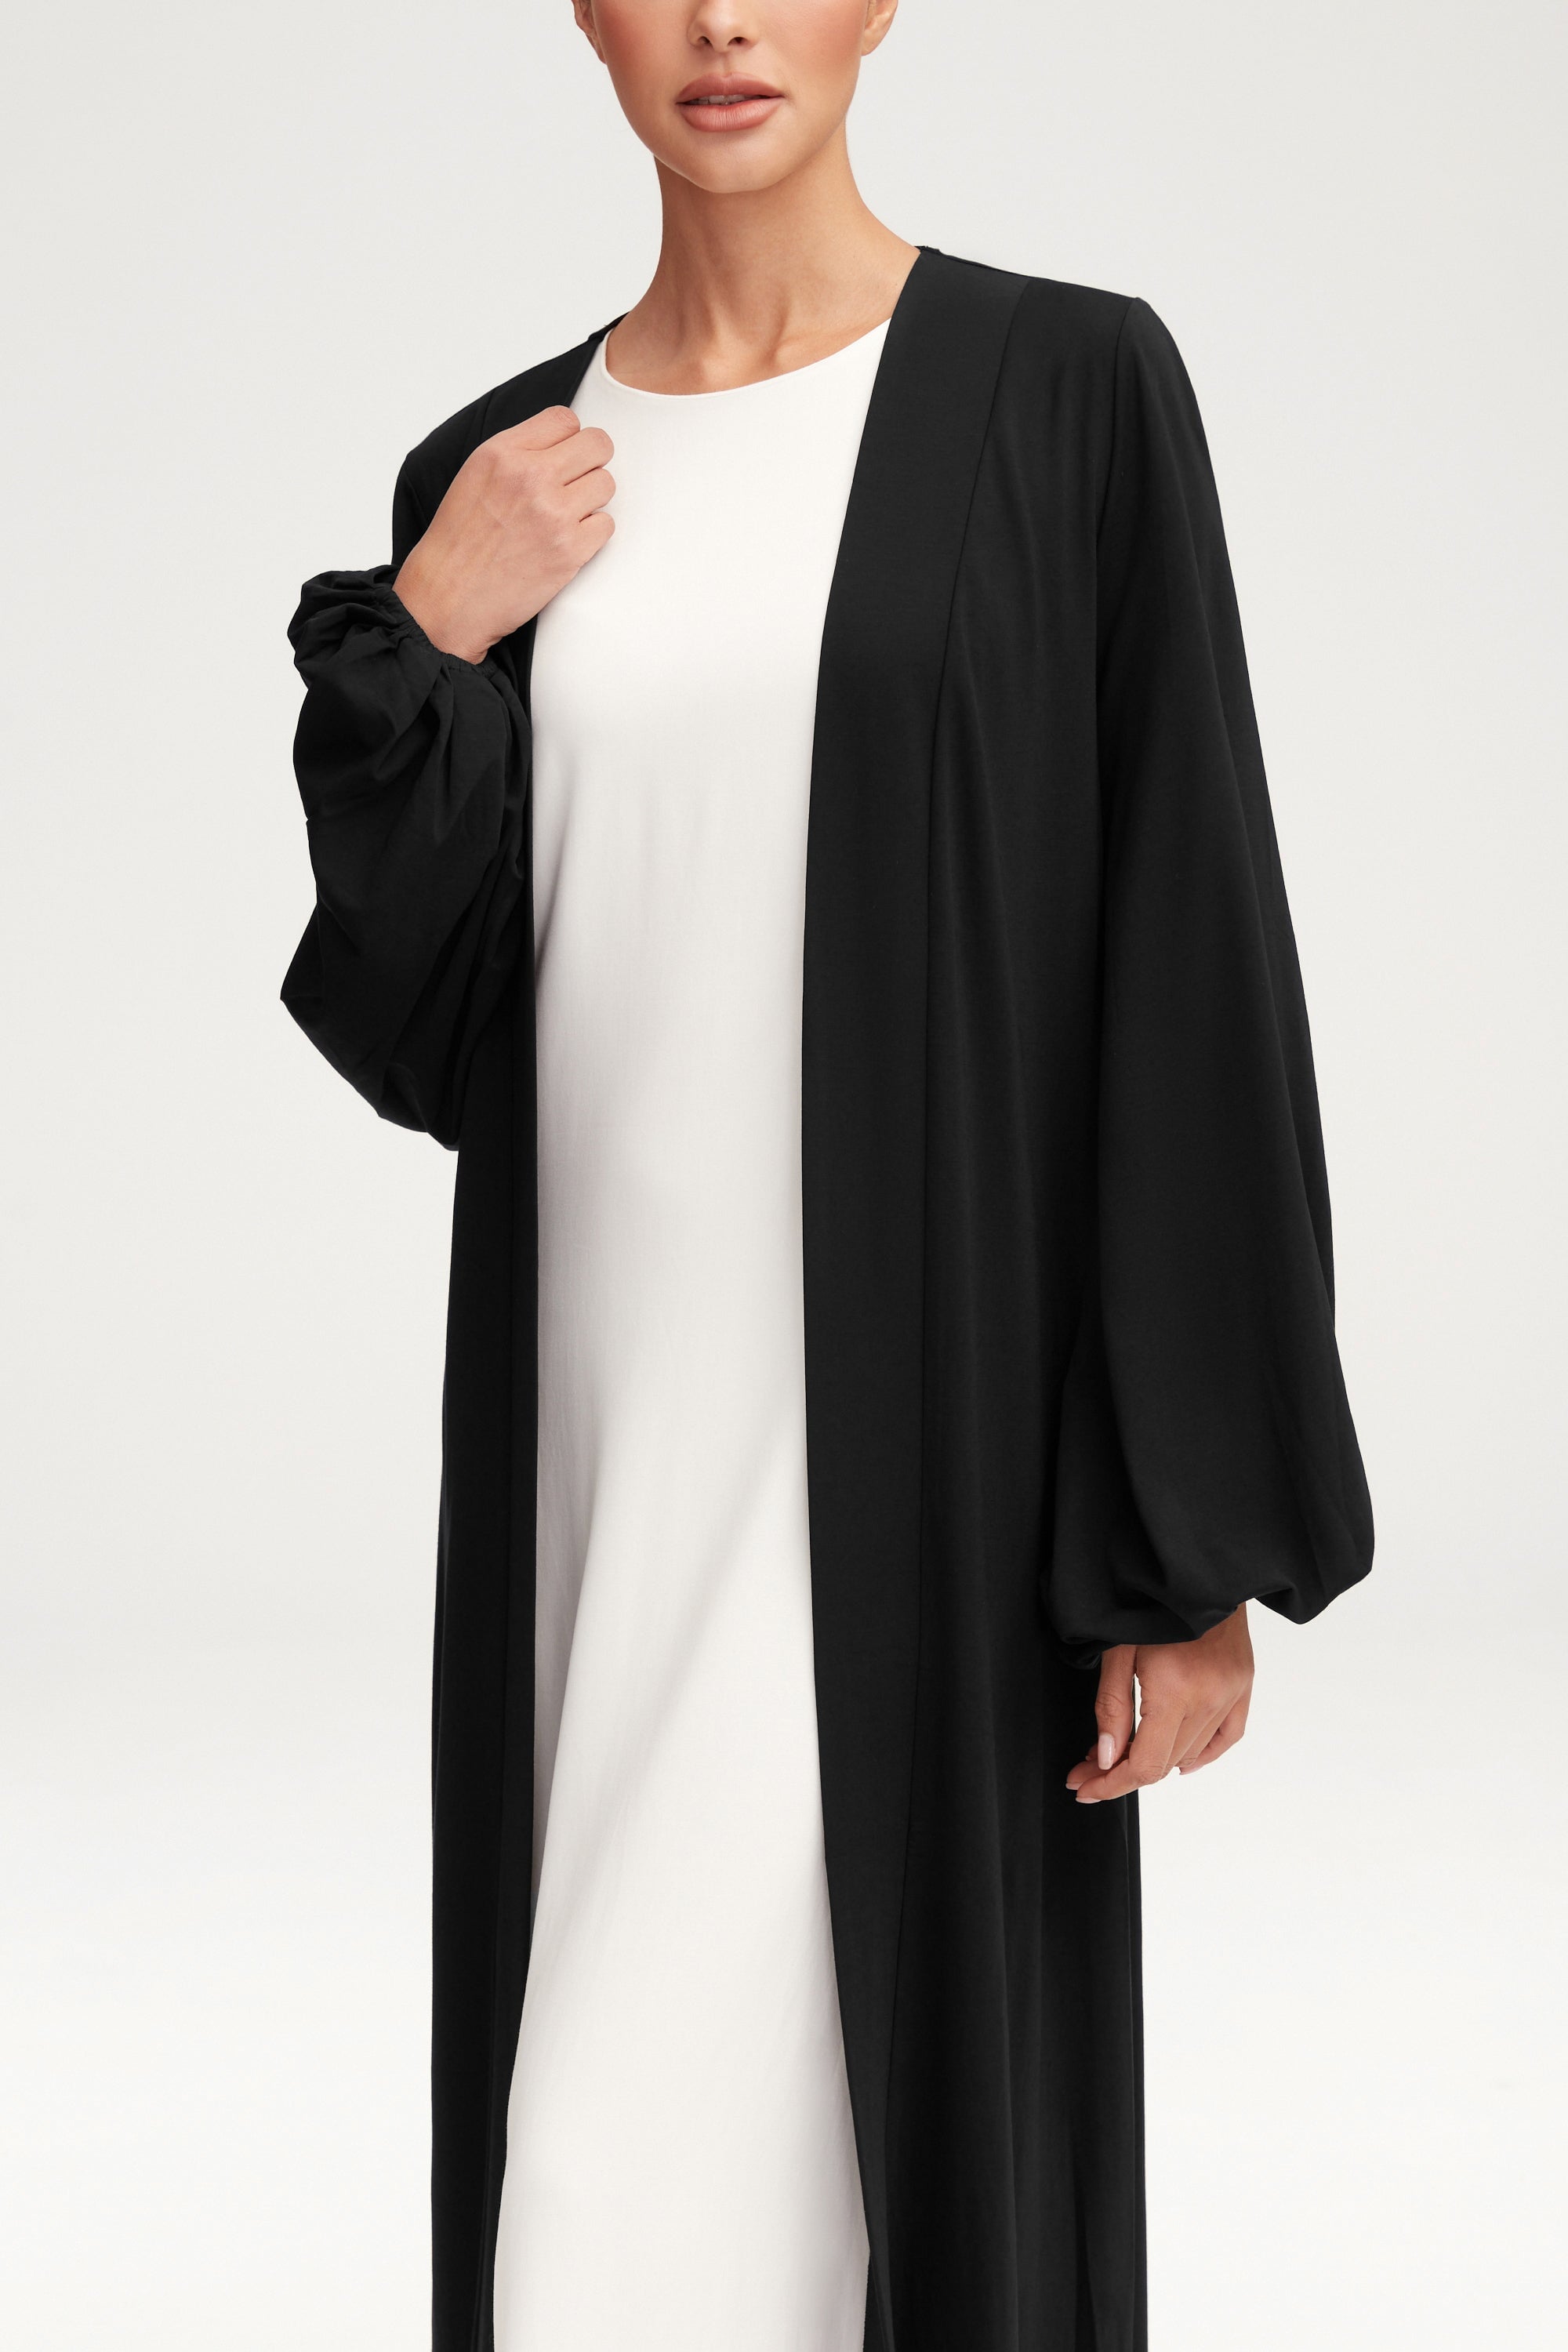 Essential Jersey Open Abaya - Black Clothing Veiled 